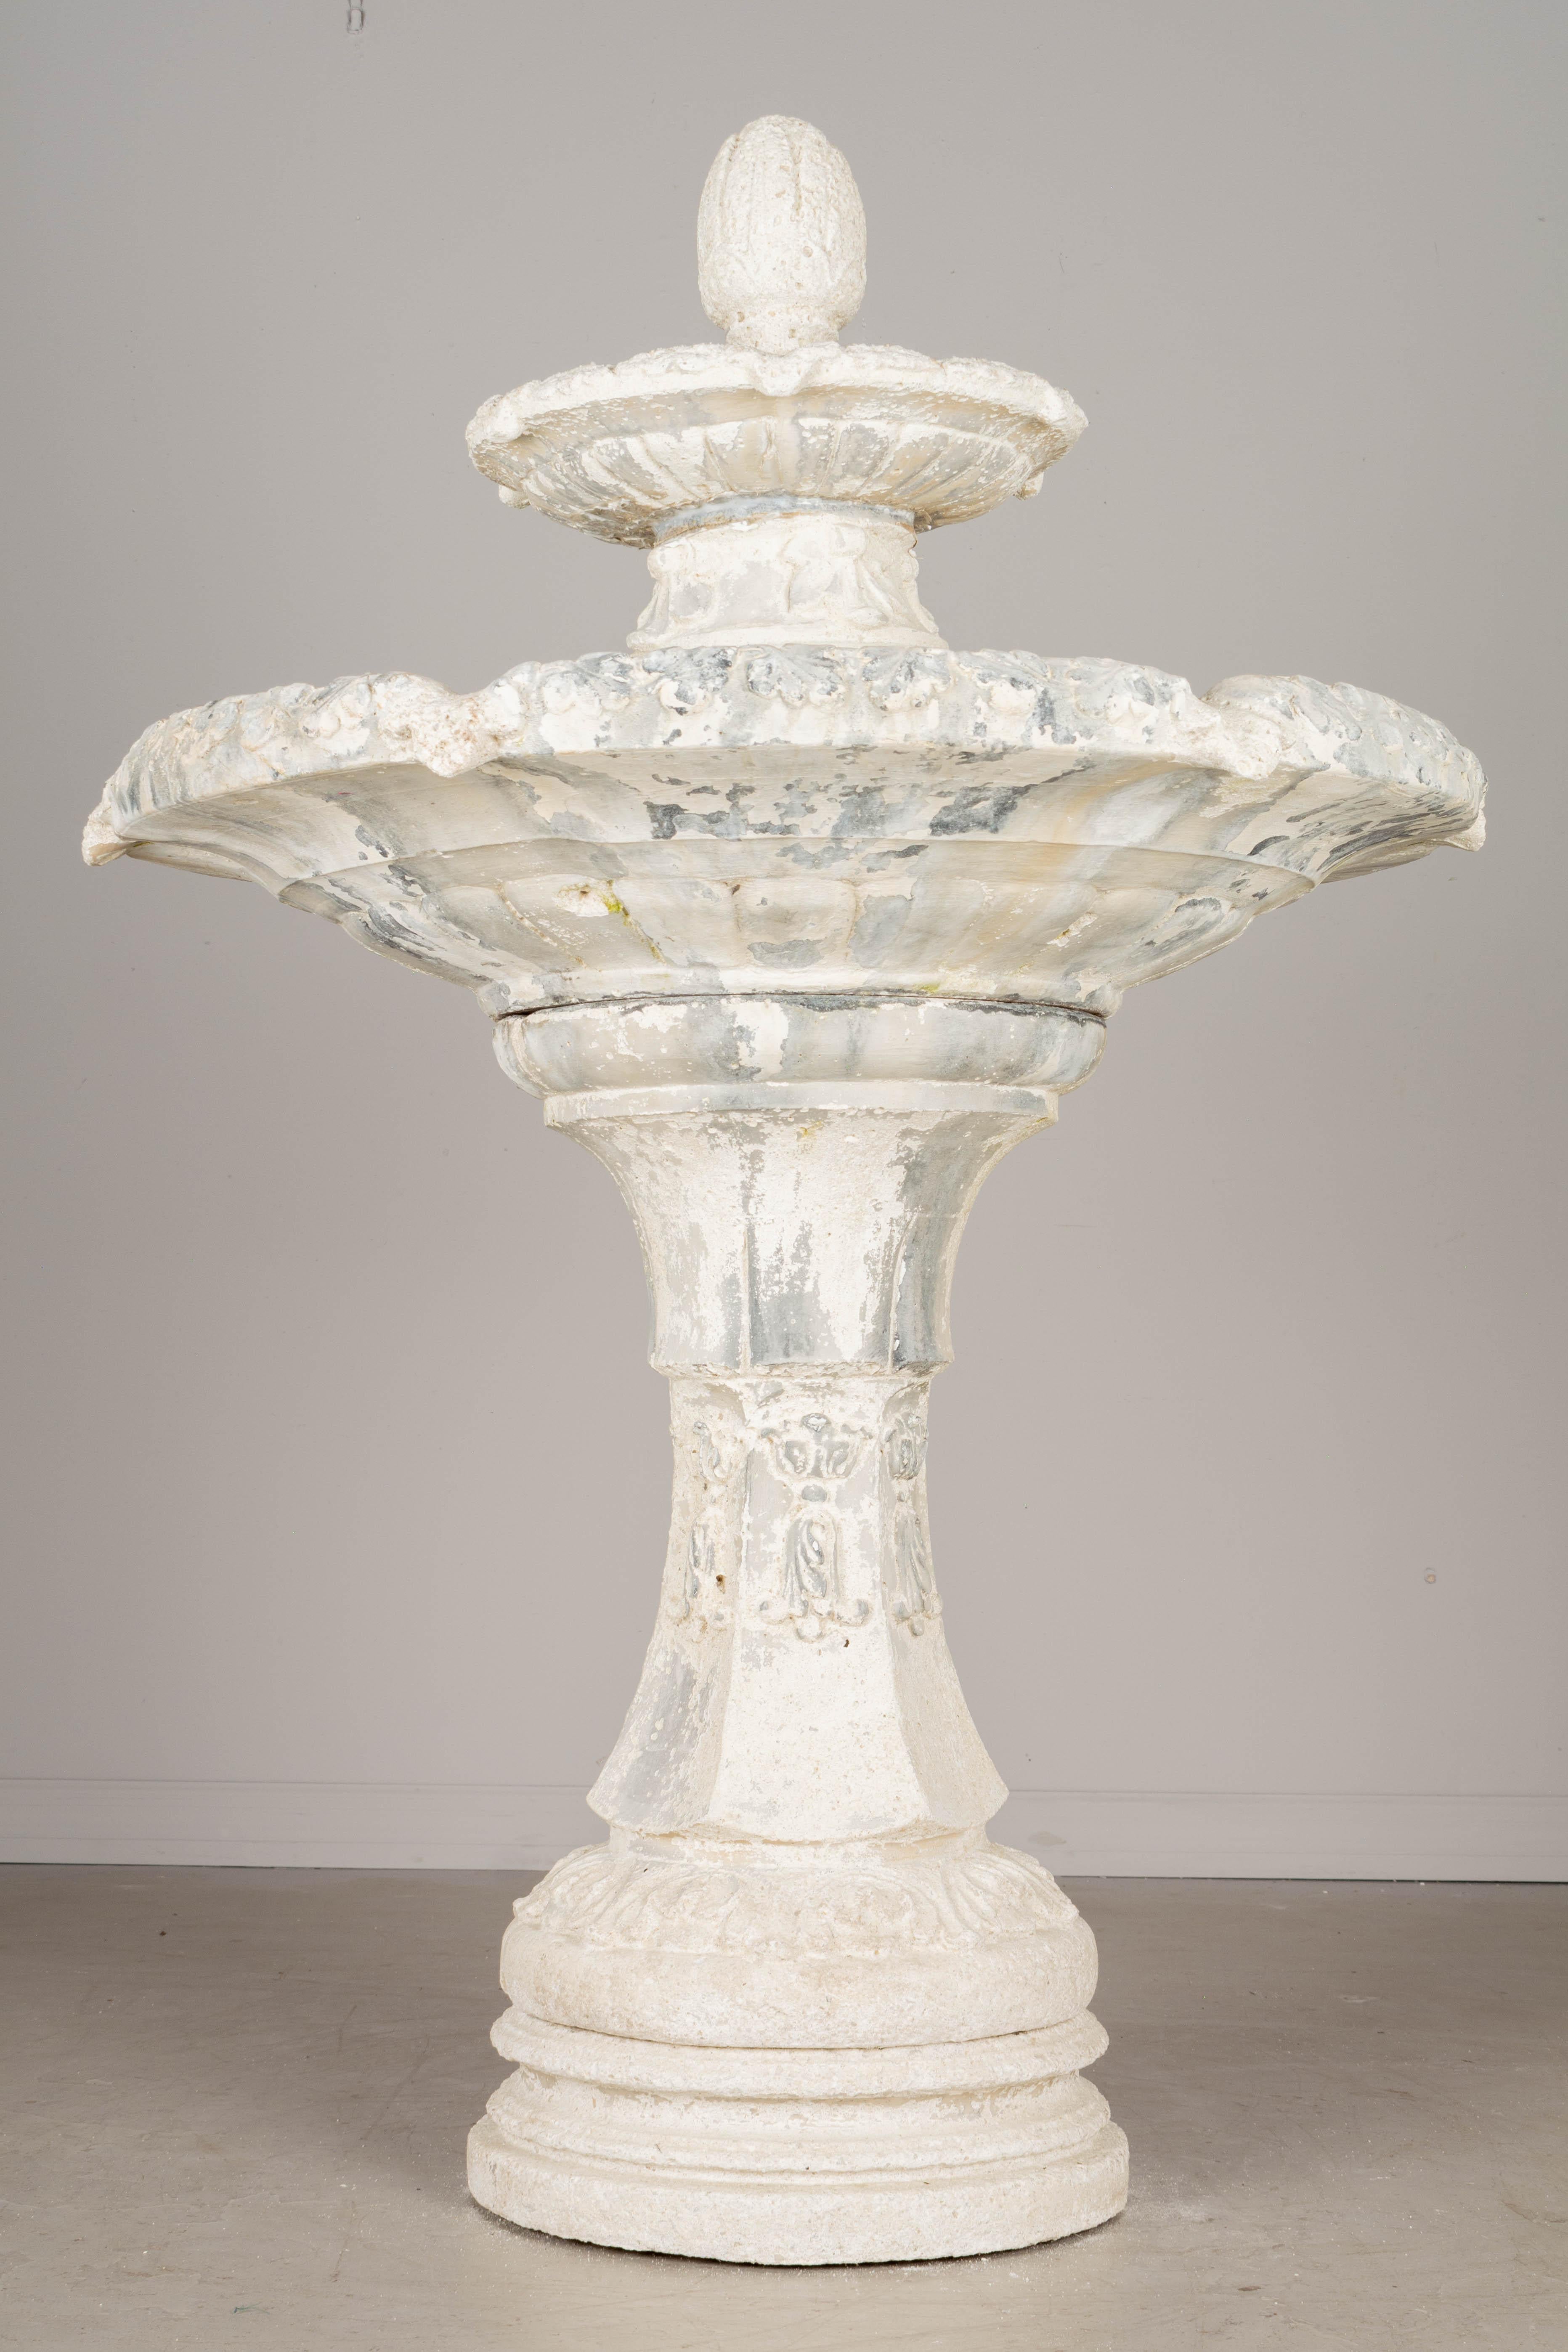 A vintage tiered garden fountain with pedestal base, two basins and a large finial. Decorative leaf pattern around the rim. Worn white patina. In six stacking parts. Made by Robinson Concrete Specialties. Circa 1980s. 
Dimensions: 62